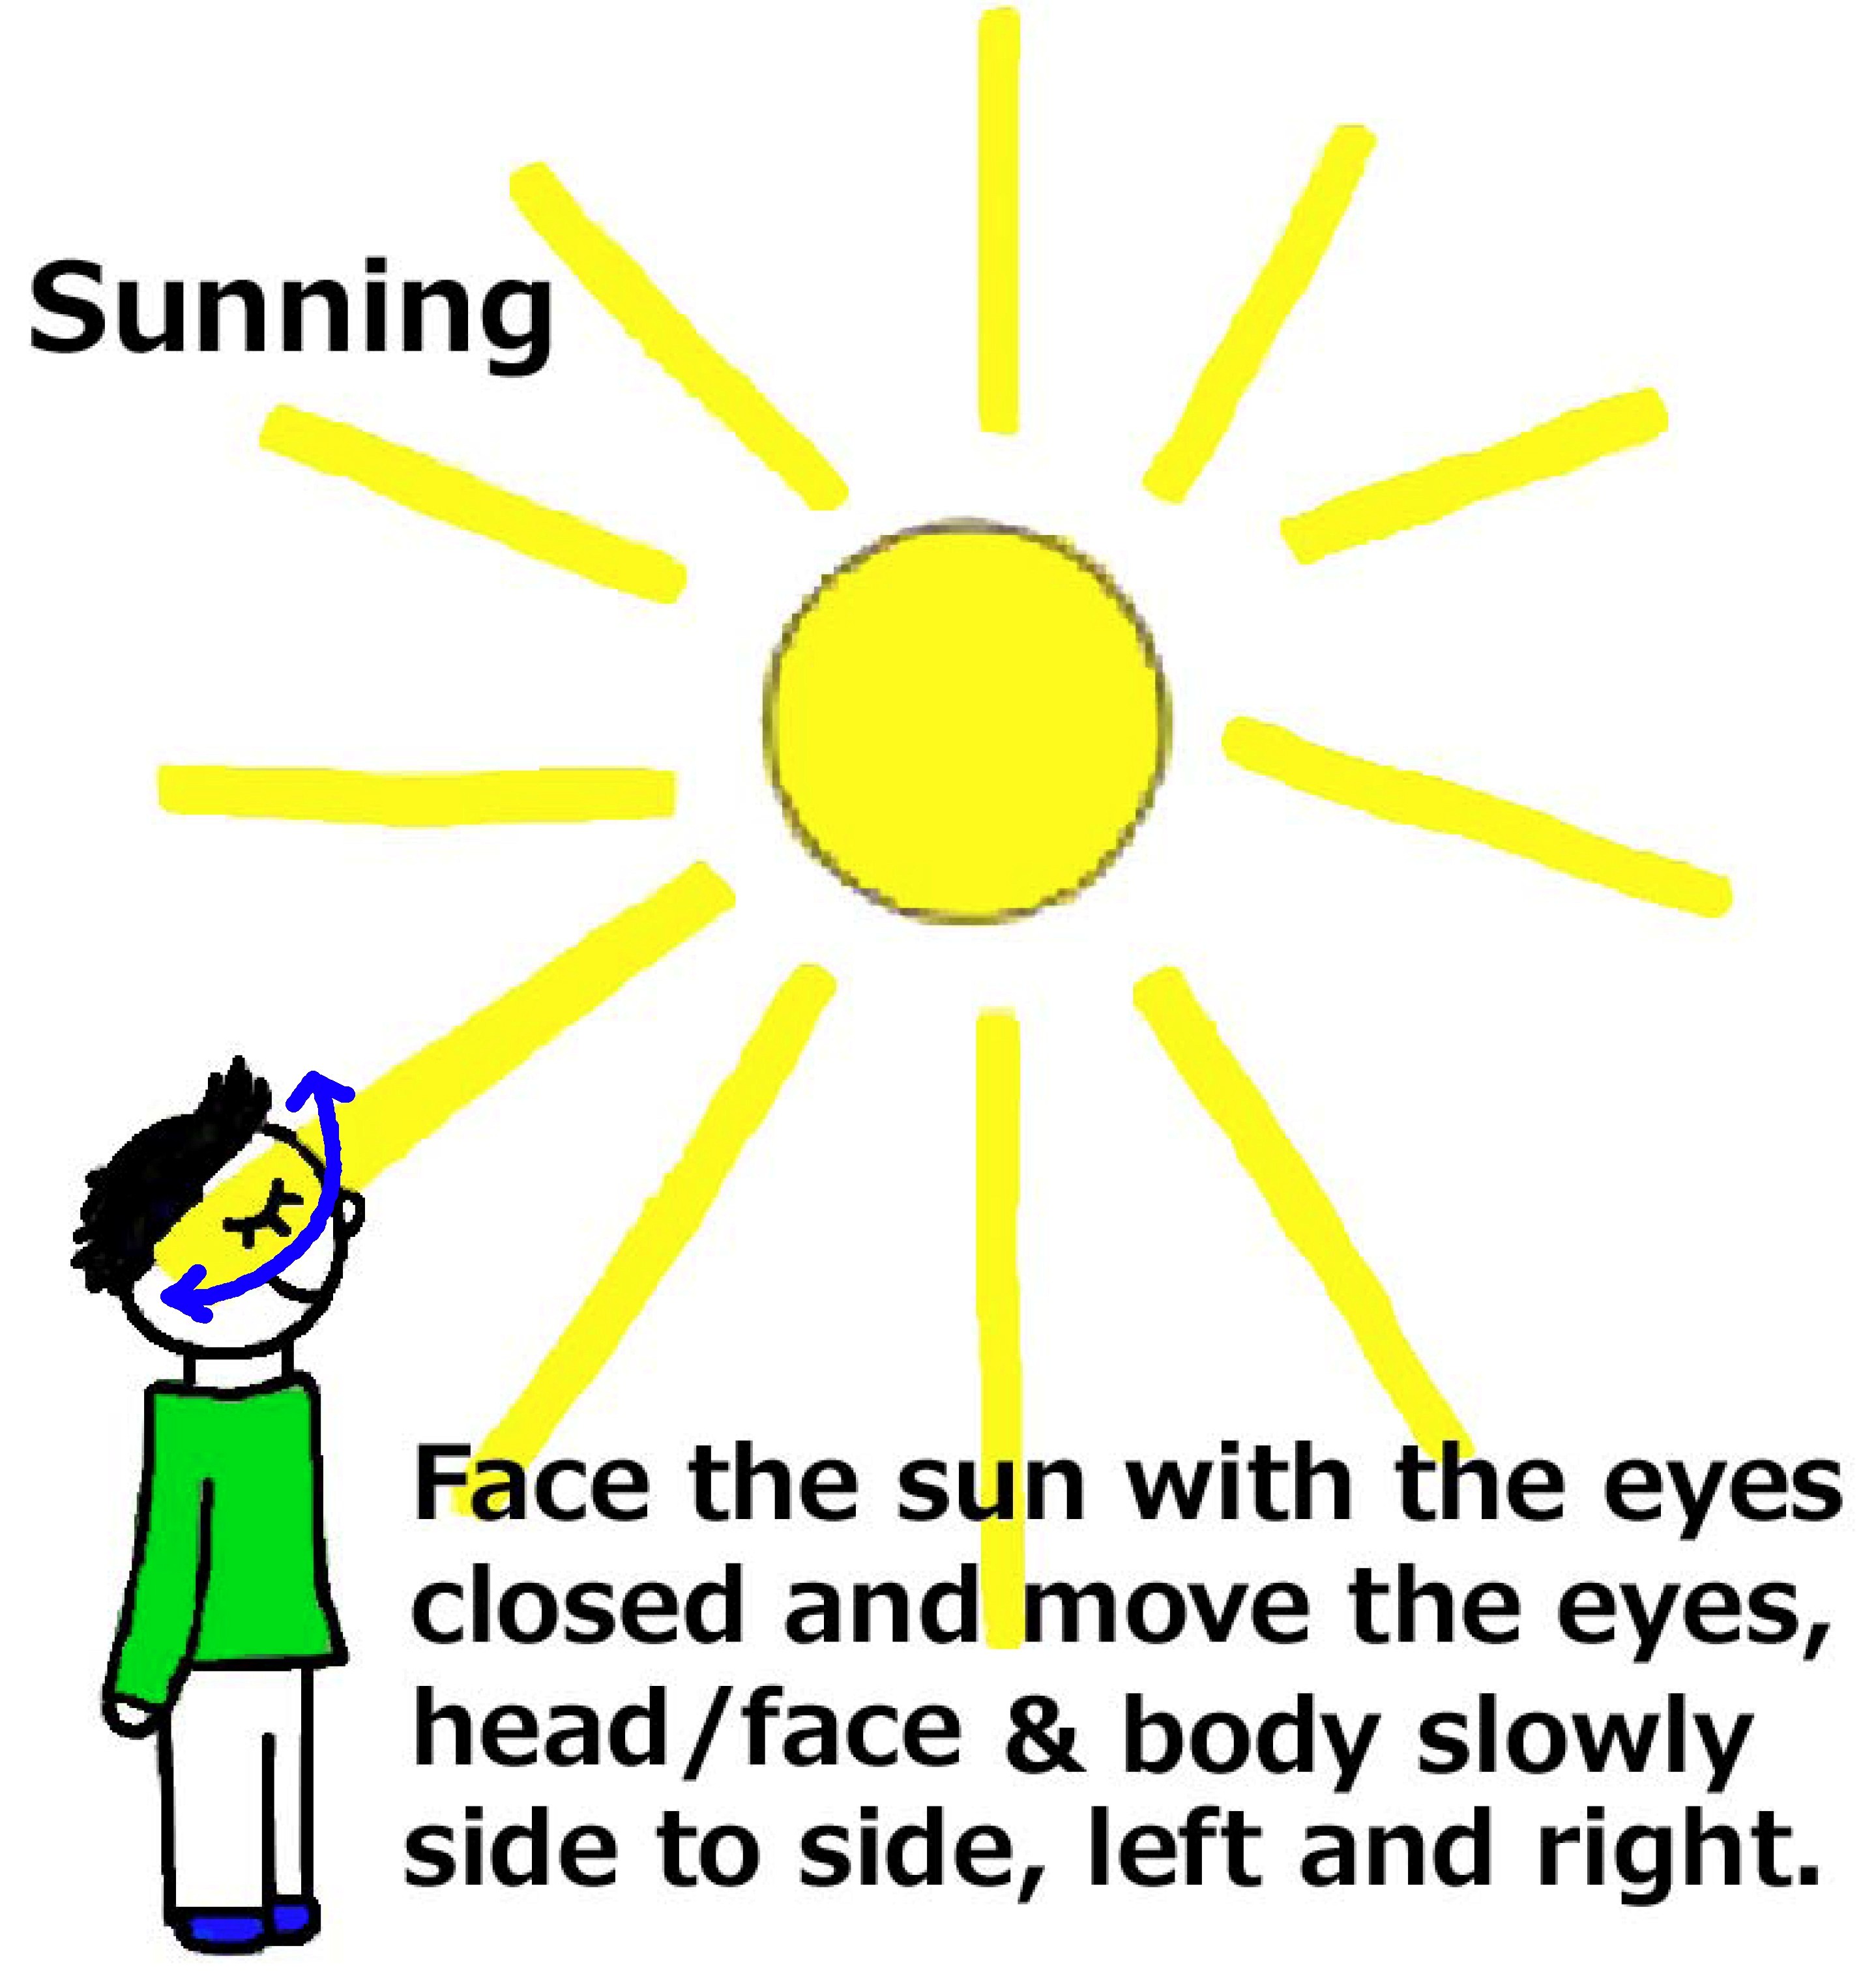 Sunning - Move the head/face and eyes side to side...